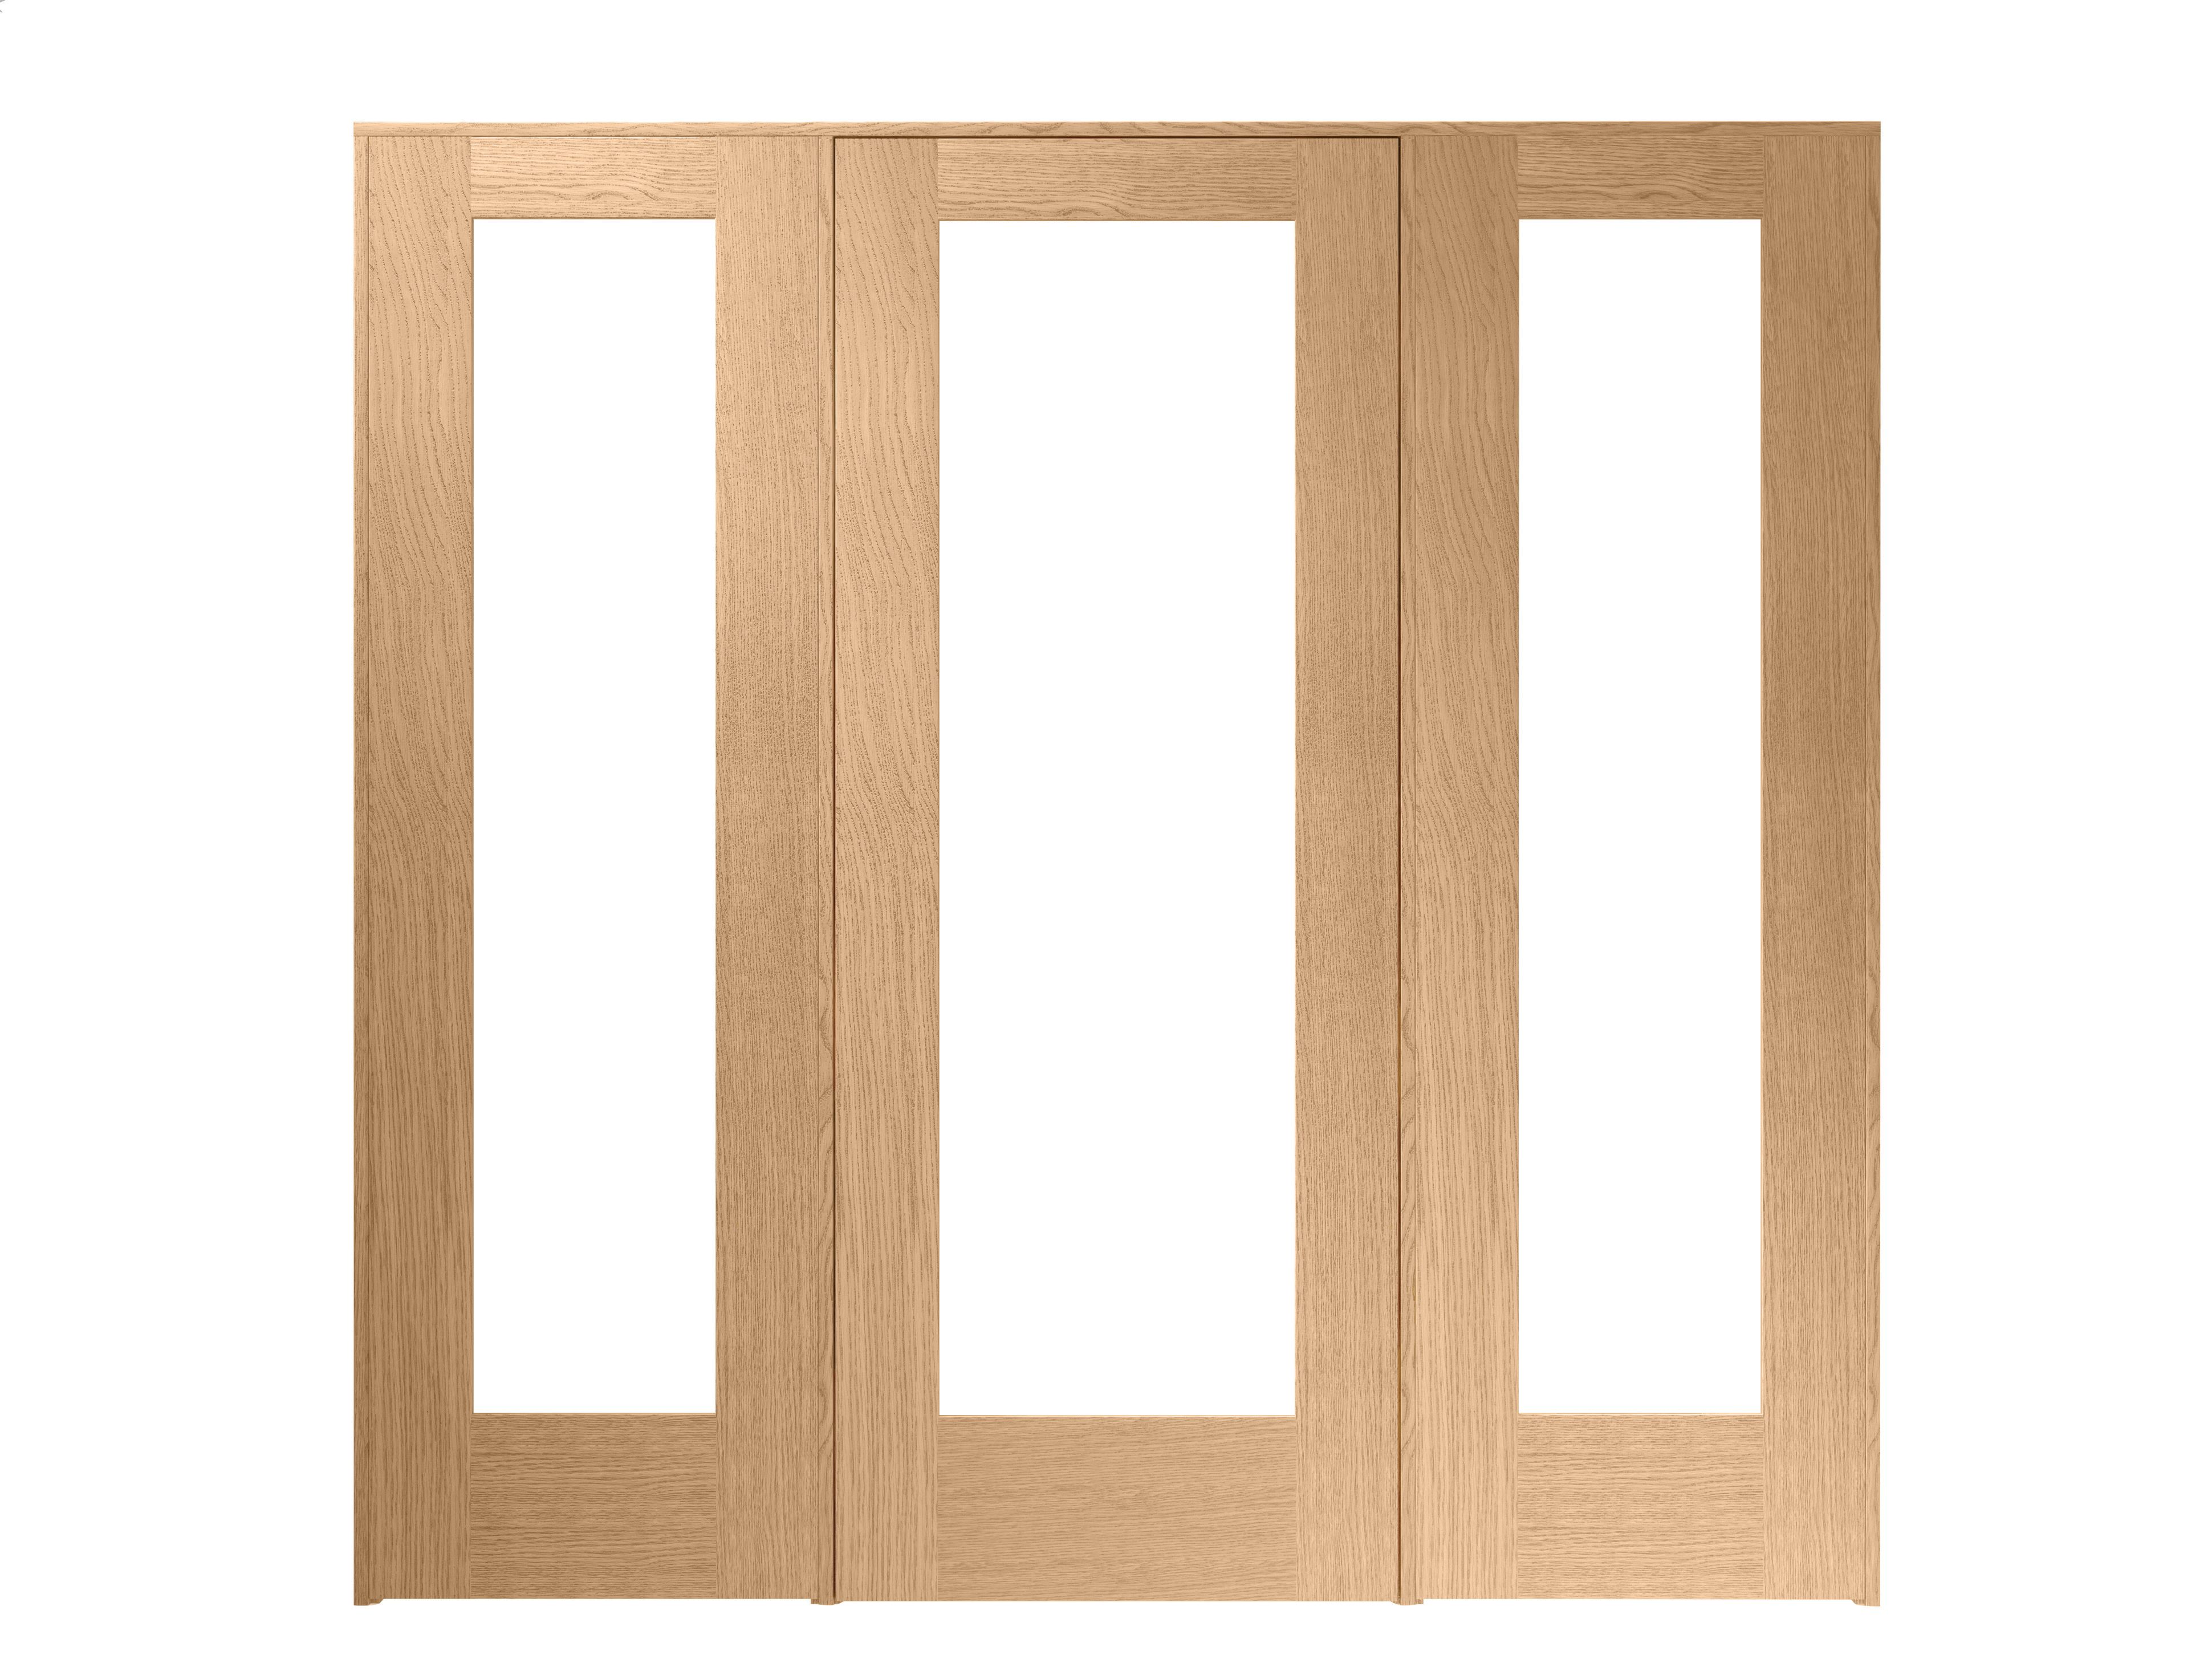 Image of Wickes Oxford Fully Glazed Oak Internal Room Divider Door with 2 Side Panels - 2017 x 2078mm